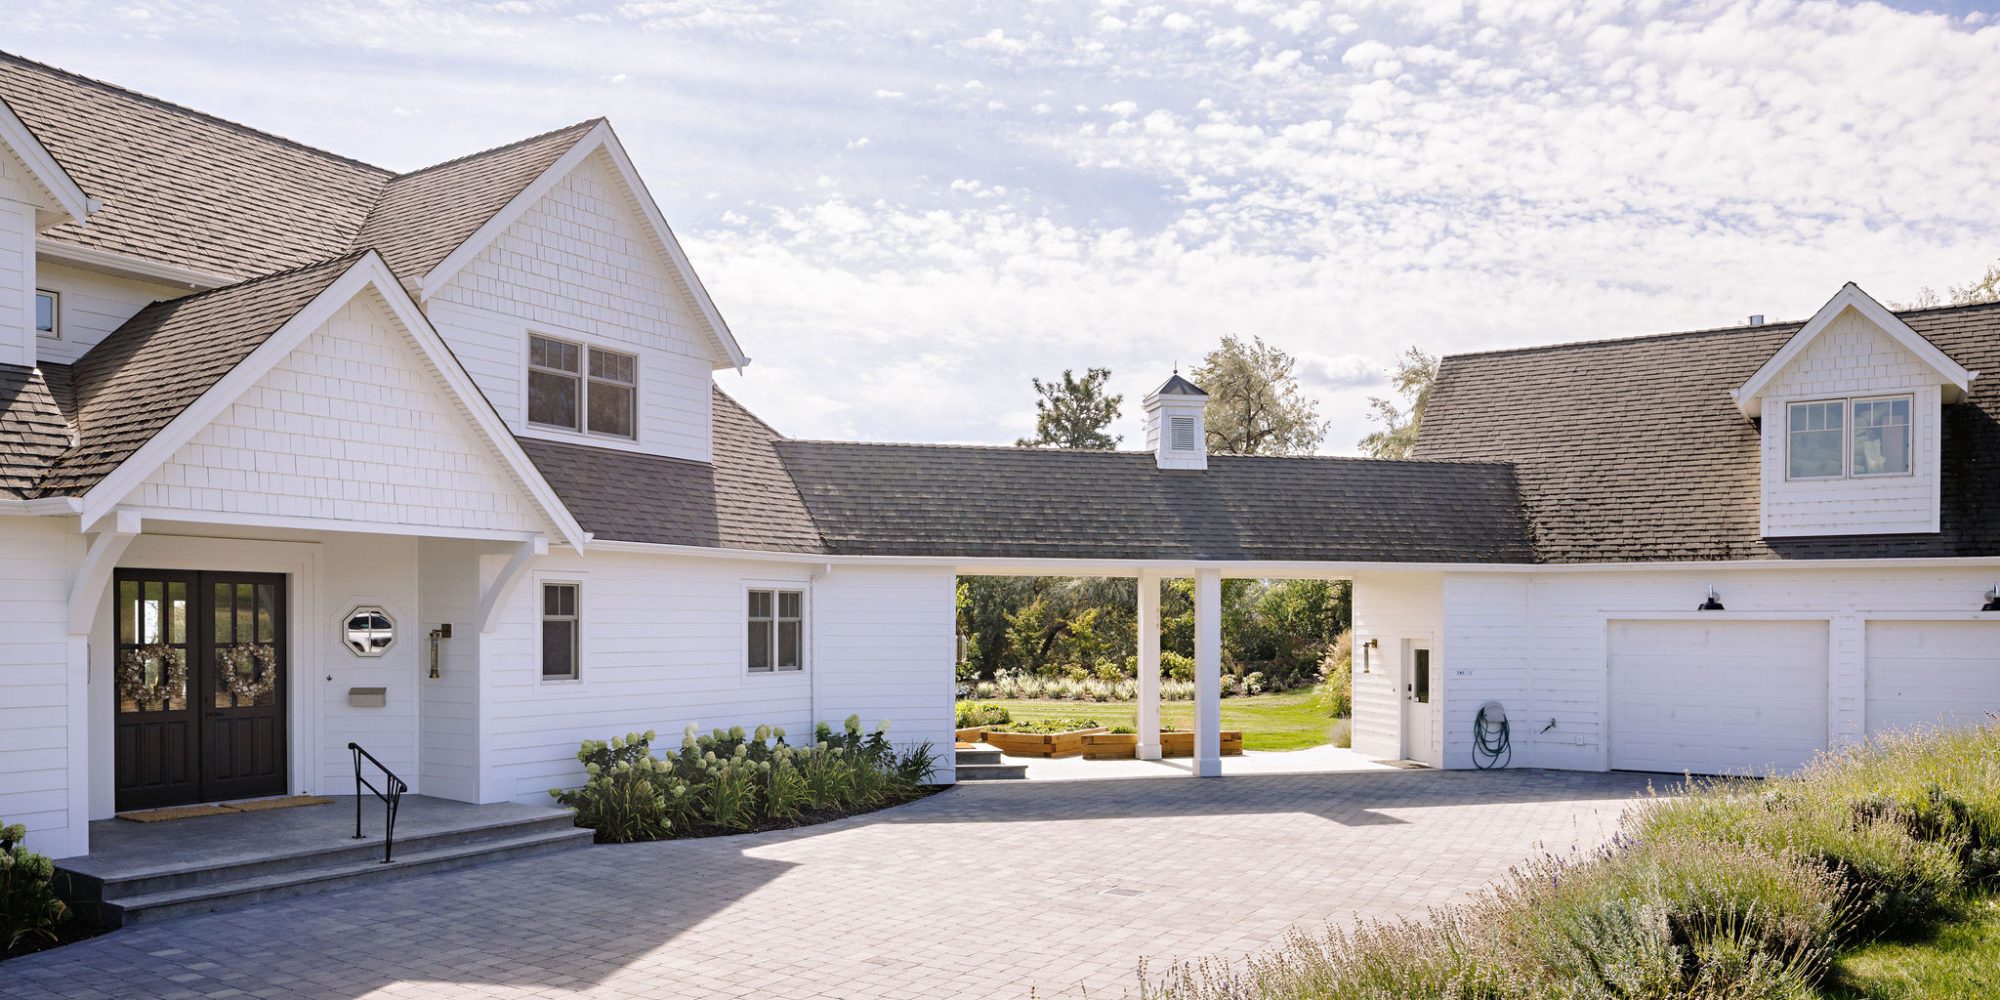 Image of the exterior of a white farmhouse a separated garage connected by a covered walkway.